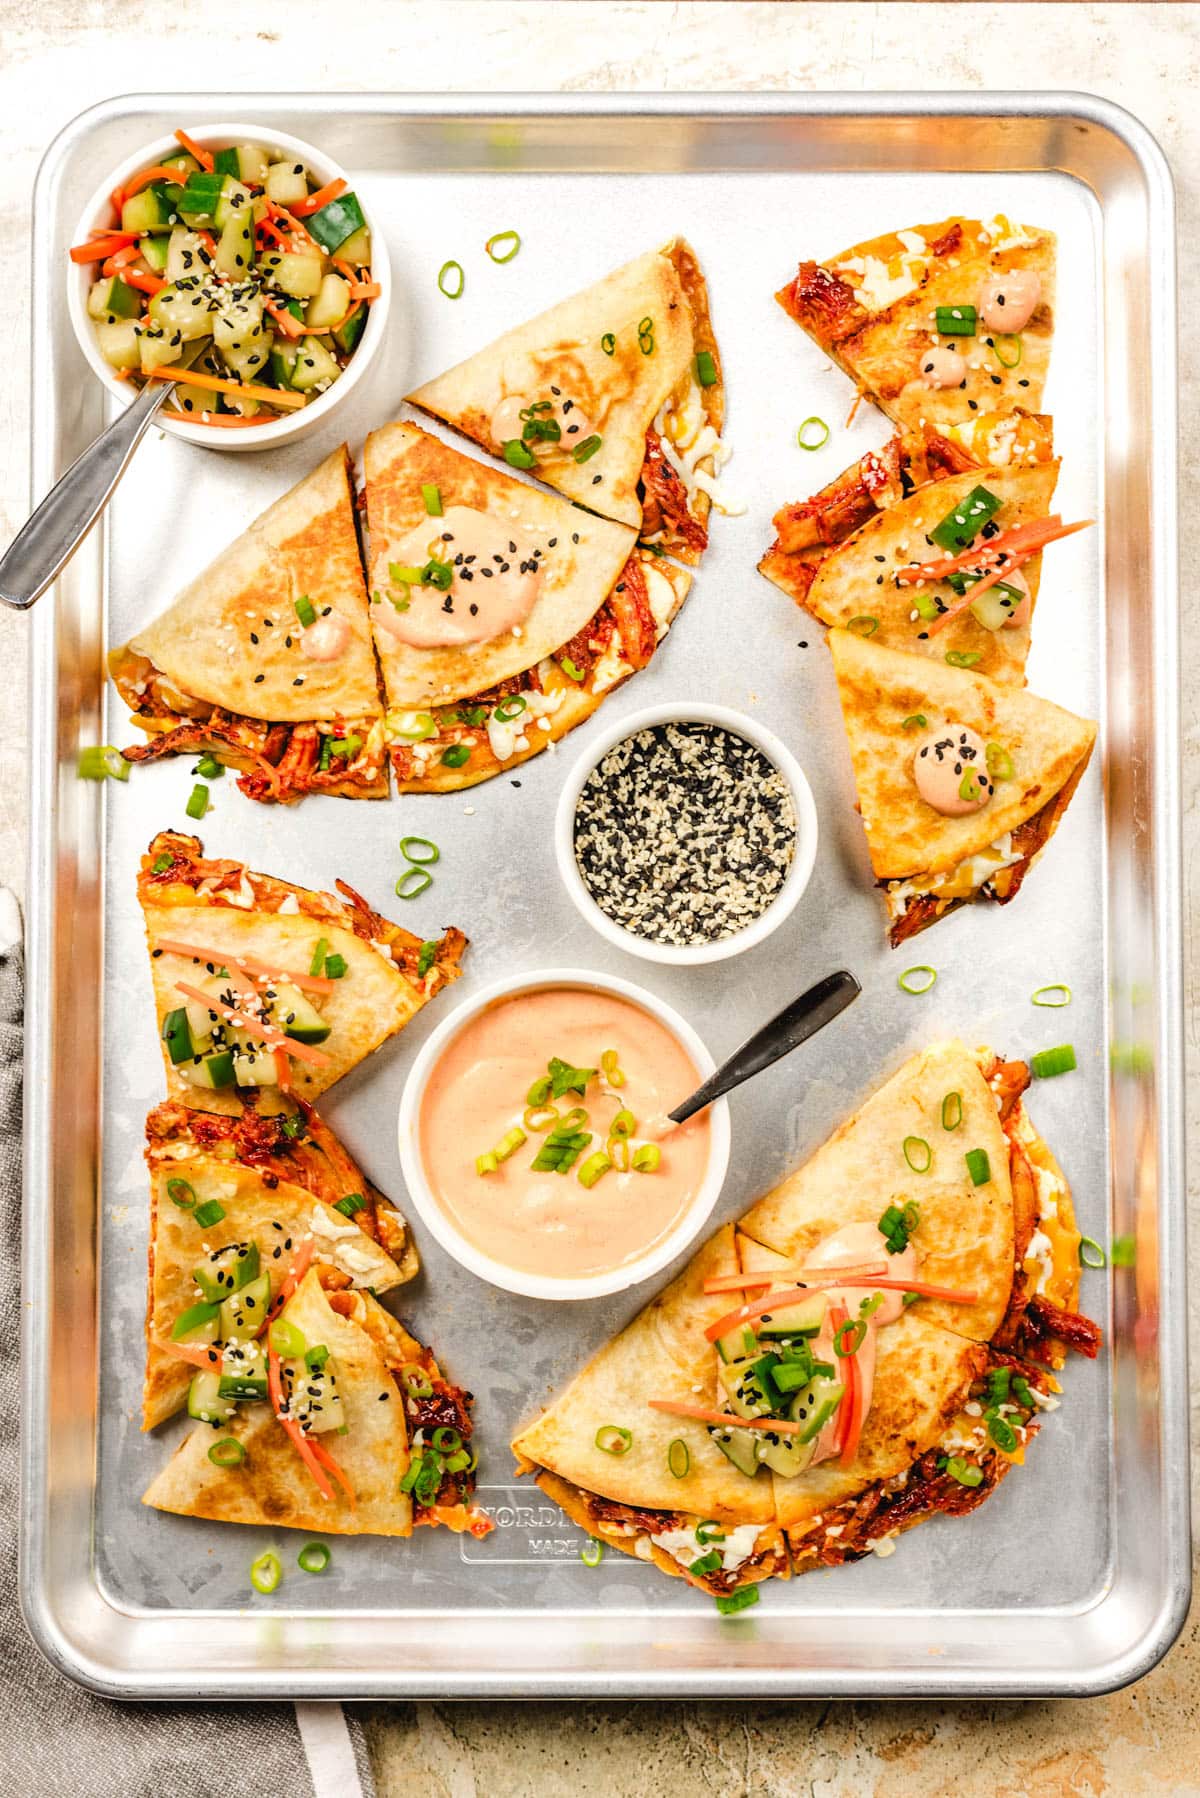 A sheet pan topped with prepared Korean fusion quesadillas, loaded up with gochujang glazed chicken and melted cheese. The quesadillas are sliced and served with gochujang crema, quick pickled vegetables, and sesame seeds.